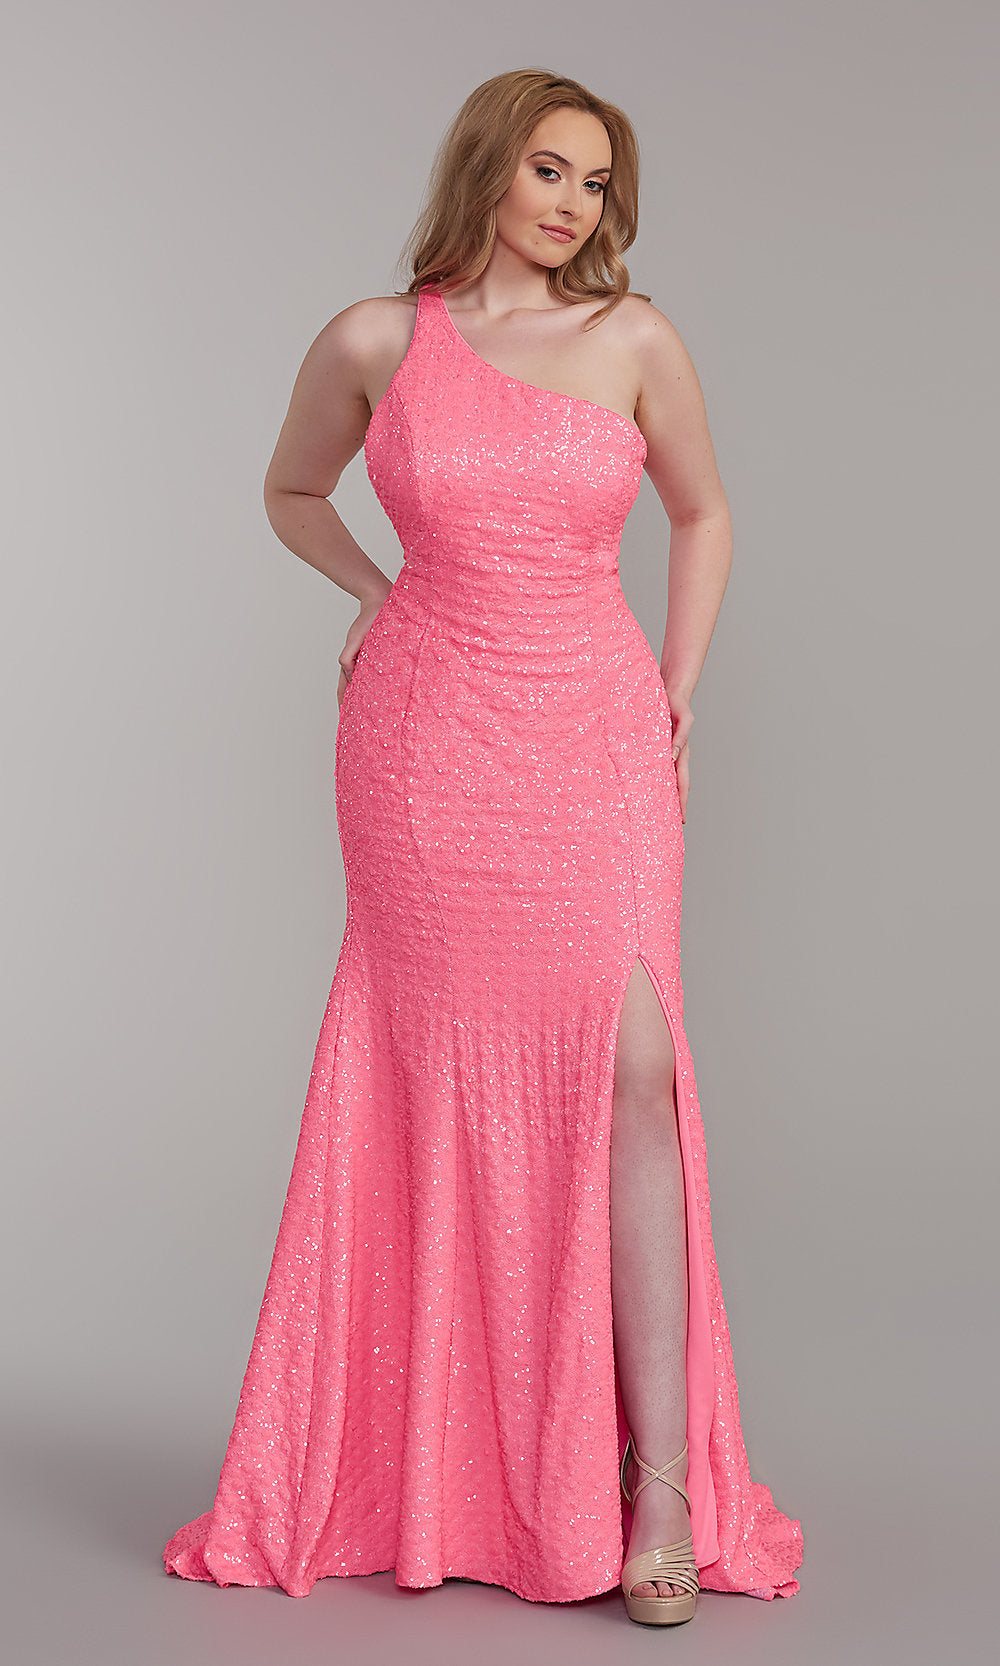 Girls Beautiful long Pink Party Prom style Dress - 170cm / Age Guide 12-14